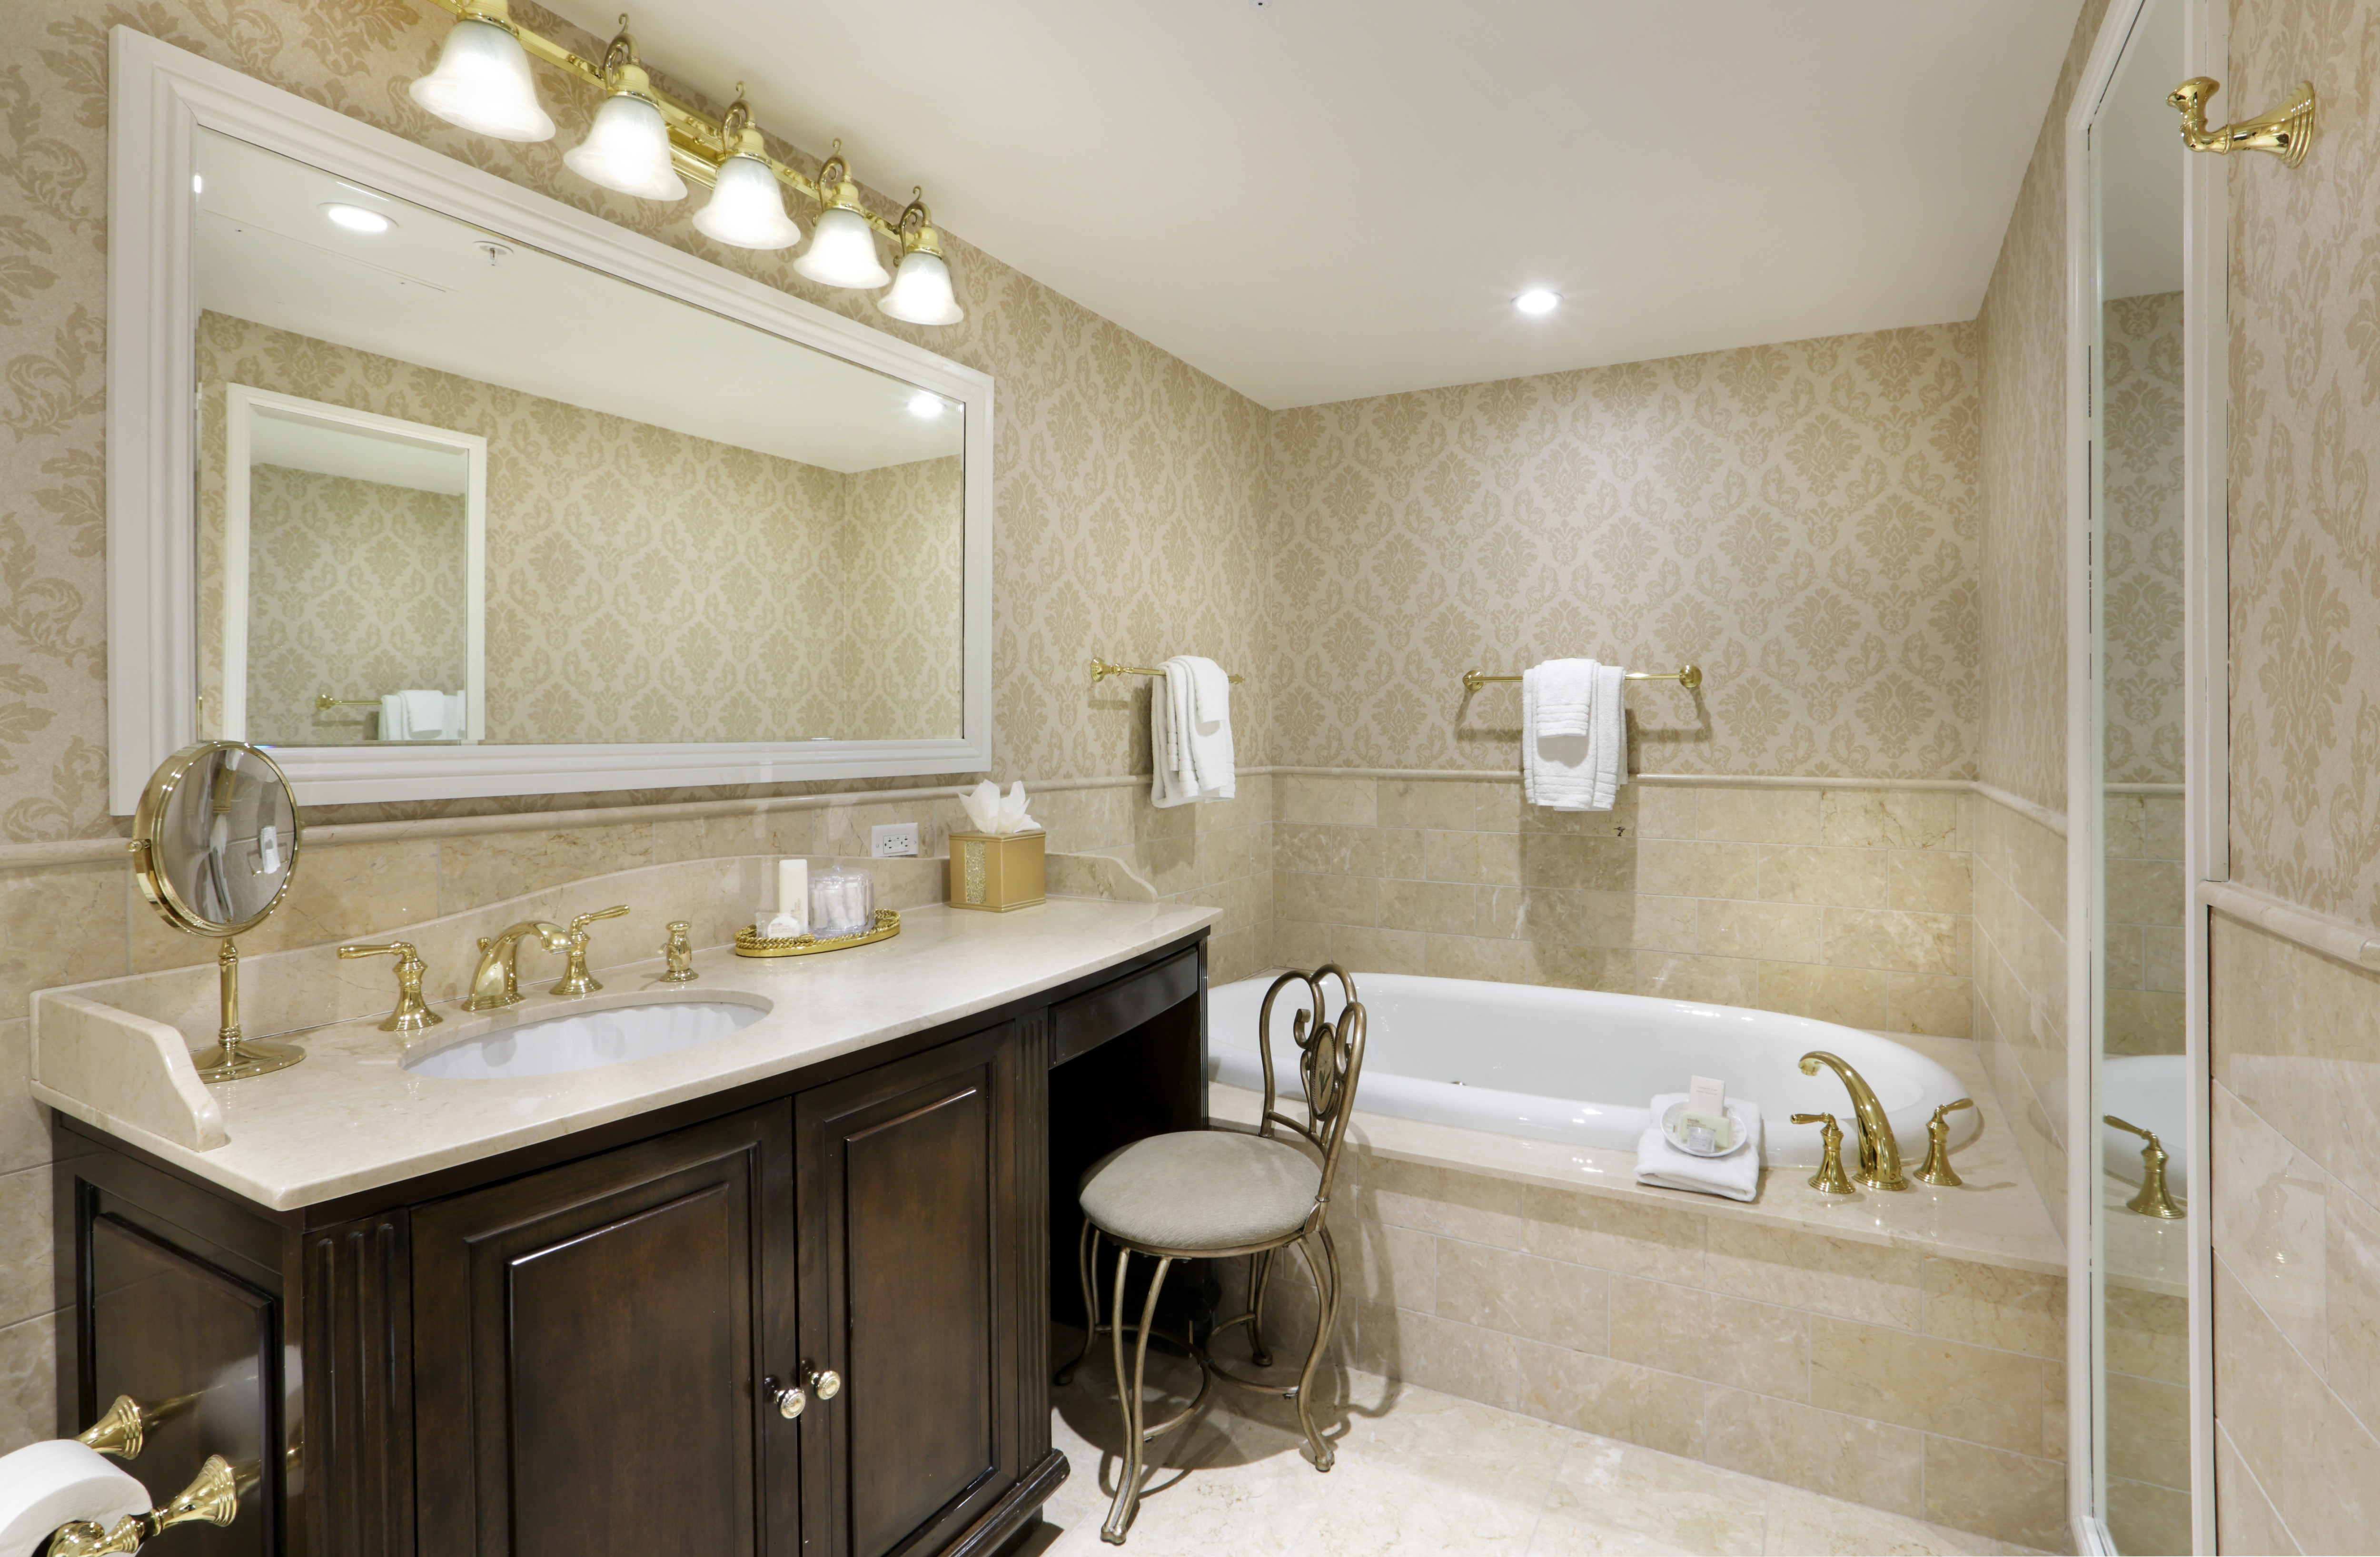 Two Bedroom Suite Bathroom with Tub and Vanity Area with Large Mirror